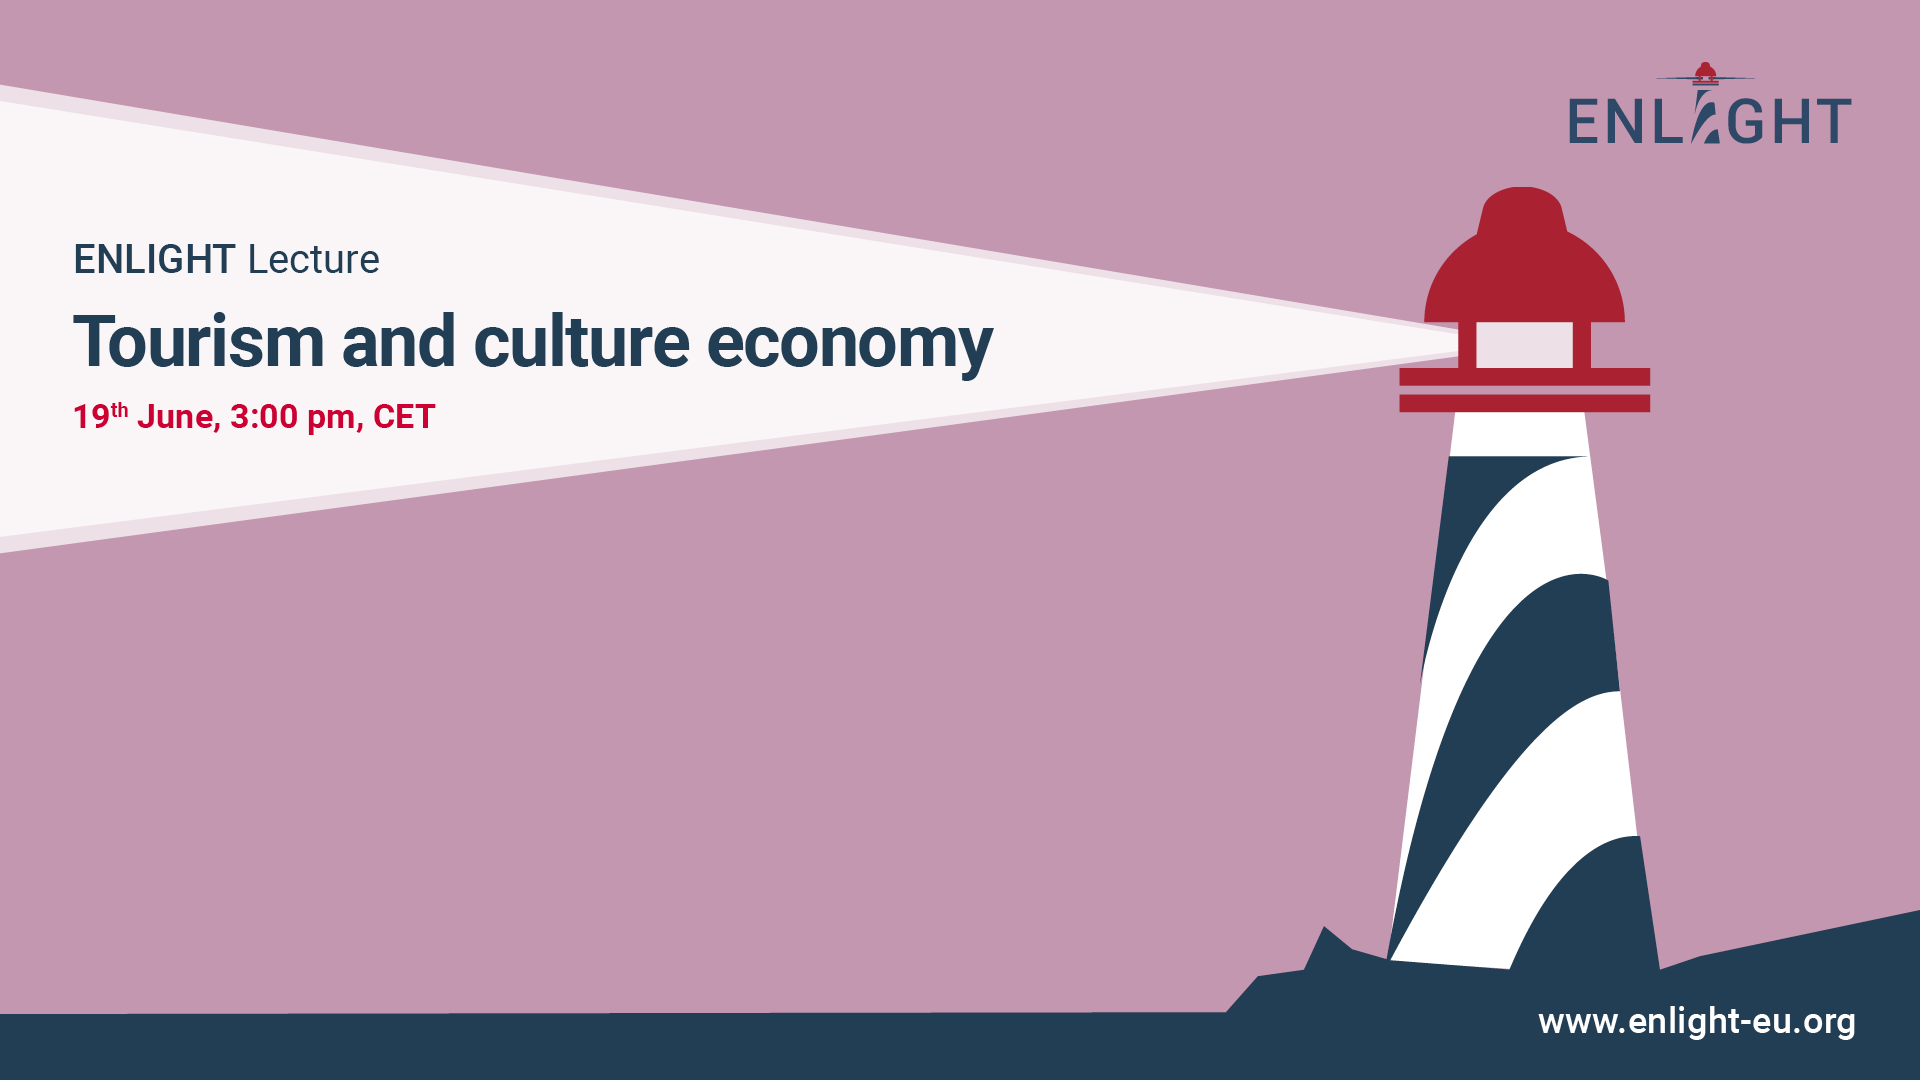  ENLIGHT Lecture Series ‘Tourism and Cultural Economy’ on June 19, 3pm CET